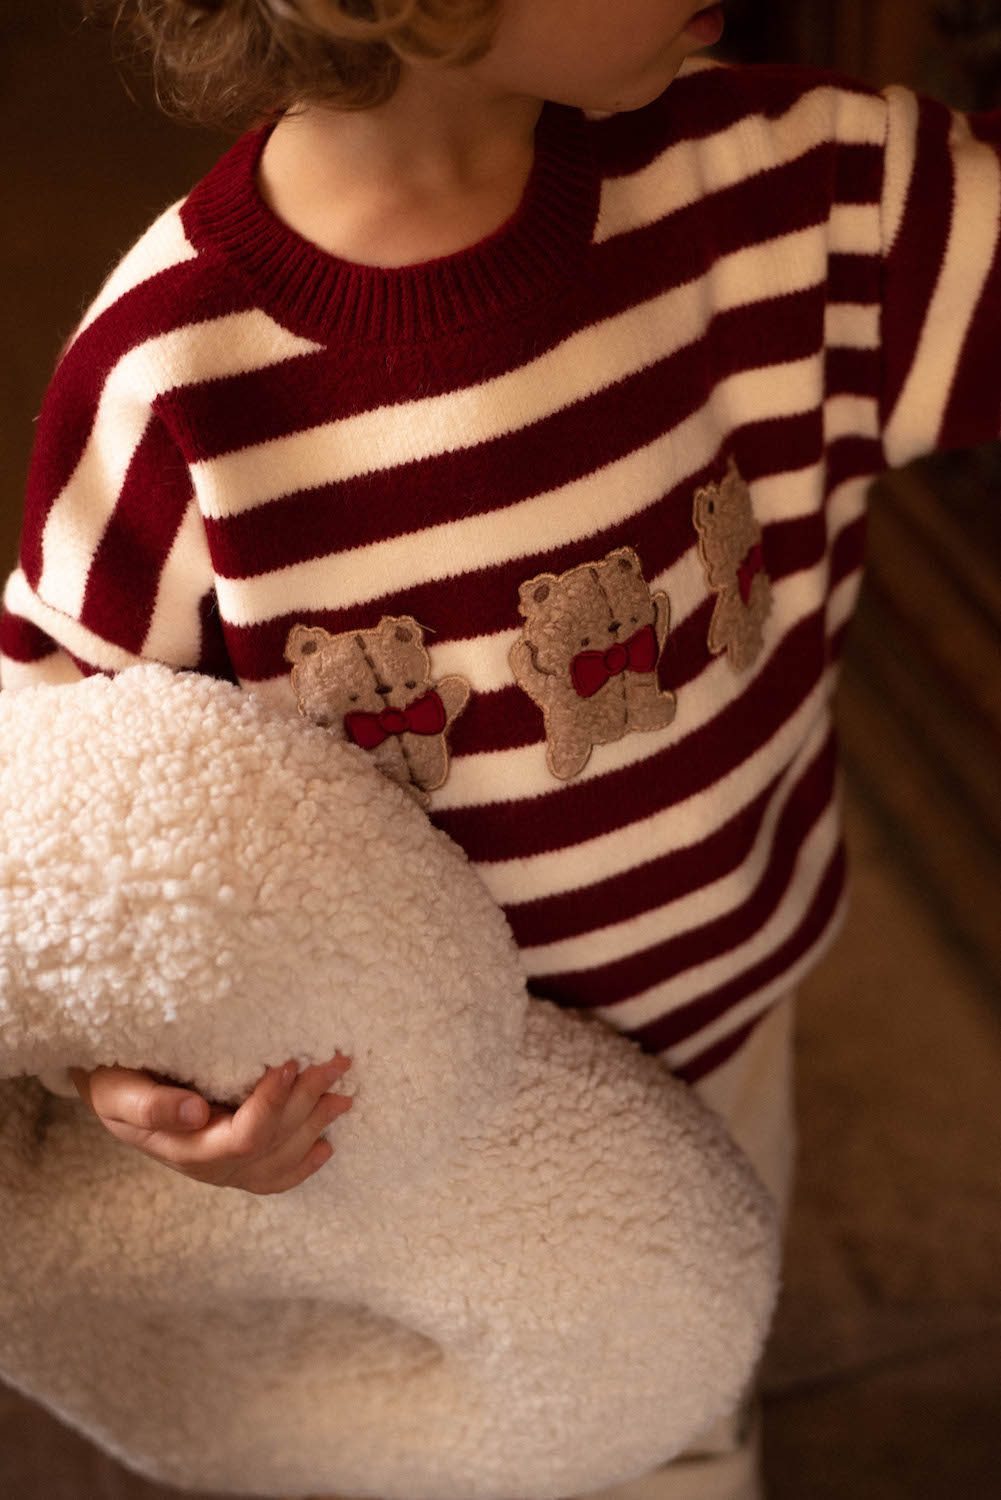 little boy in red stripes sweater holding teddy letter pillow B in his hands 